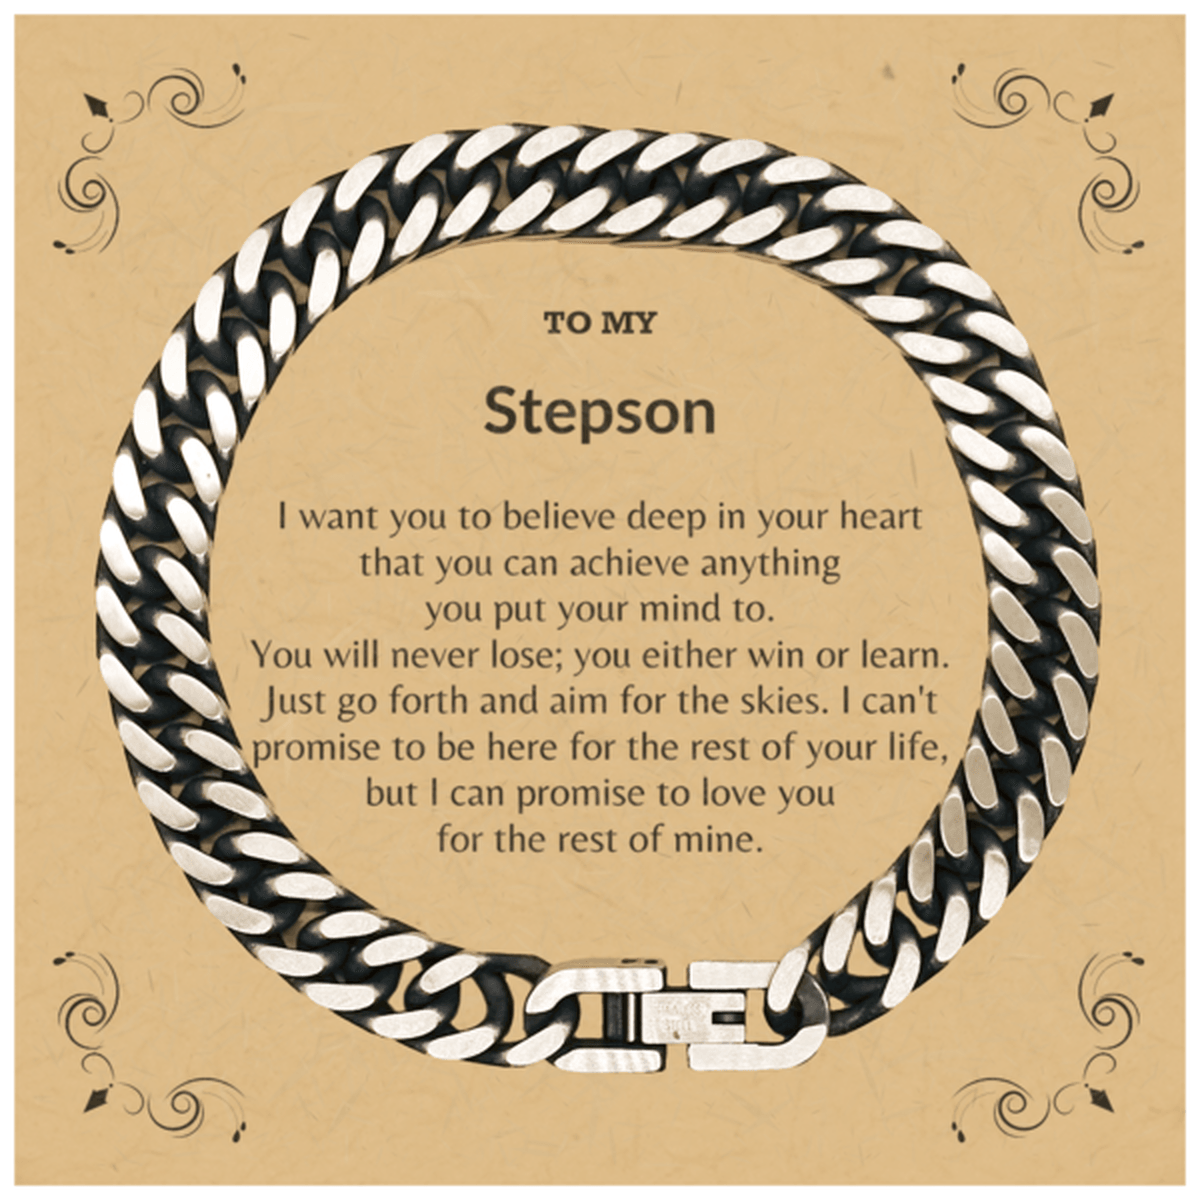 Motivational Stepson Cuban Link Chain Bracelet, I can promise to love you for the rest of my life, Birthday, Christmas Holiday Jewelry Gift - Mallard Moon Gift Shop